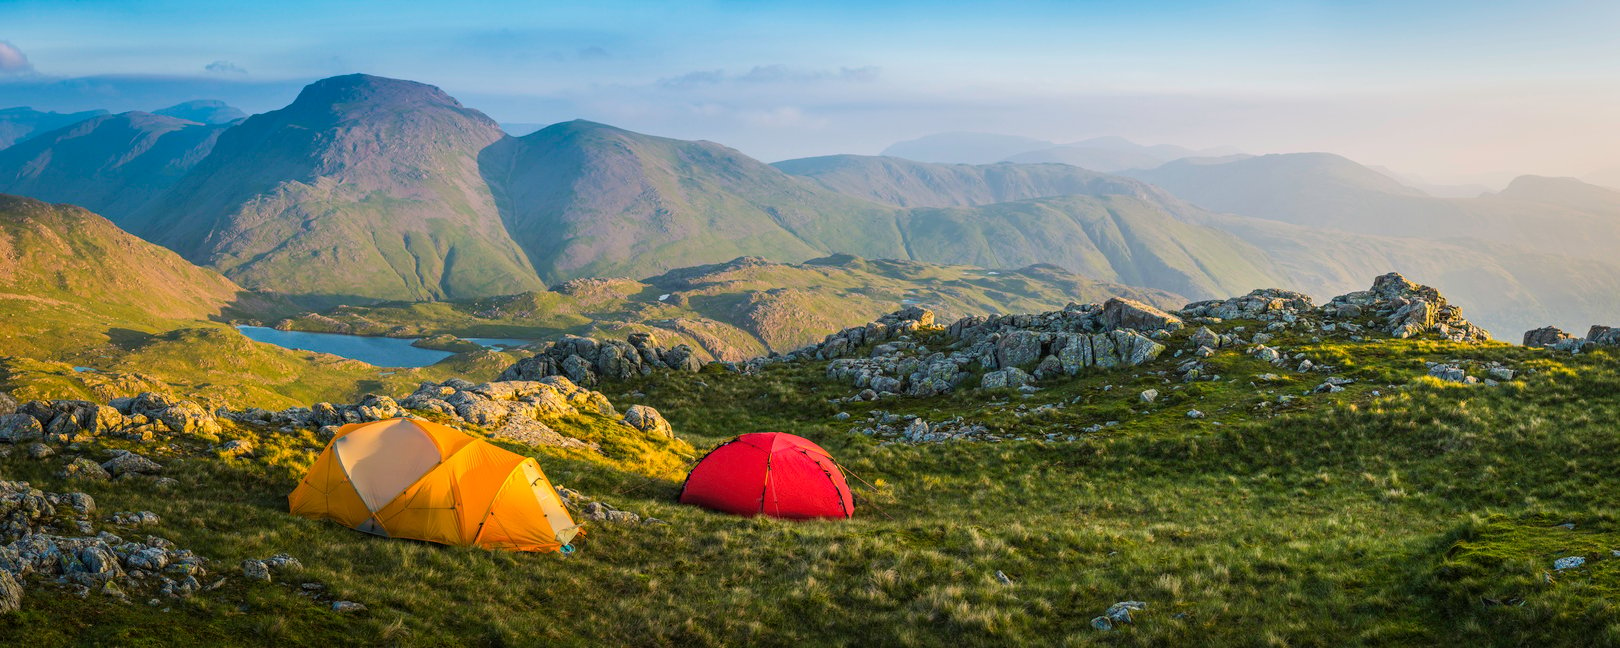 Tents wild camping in the Lake District